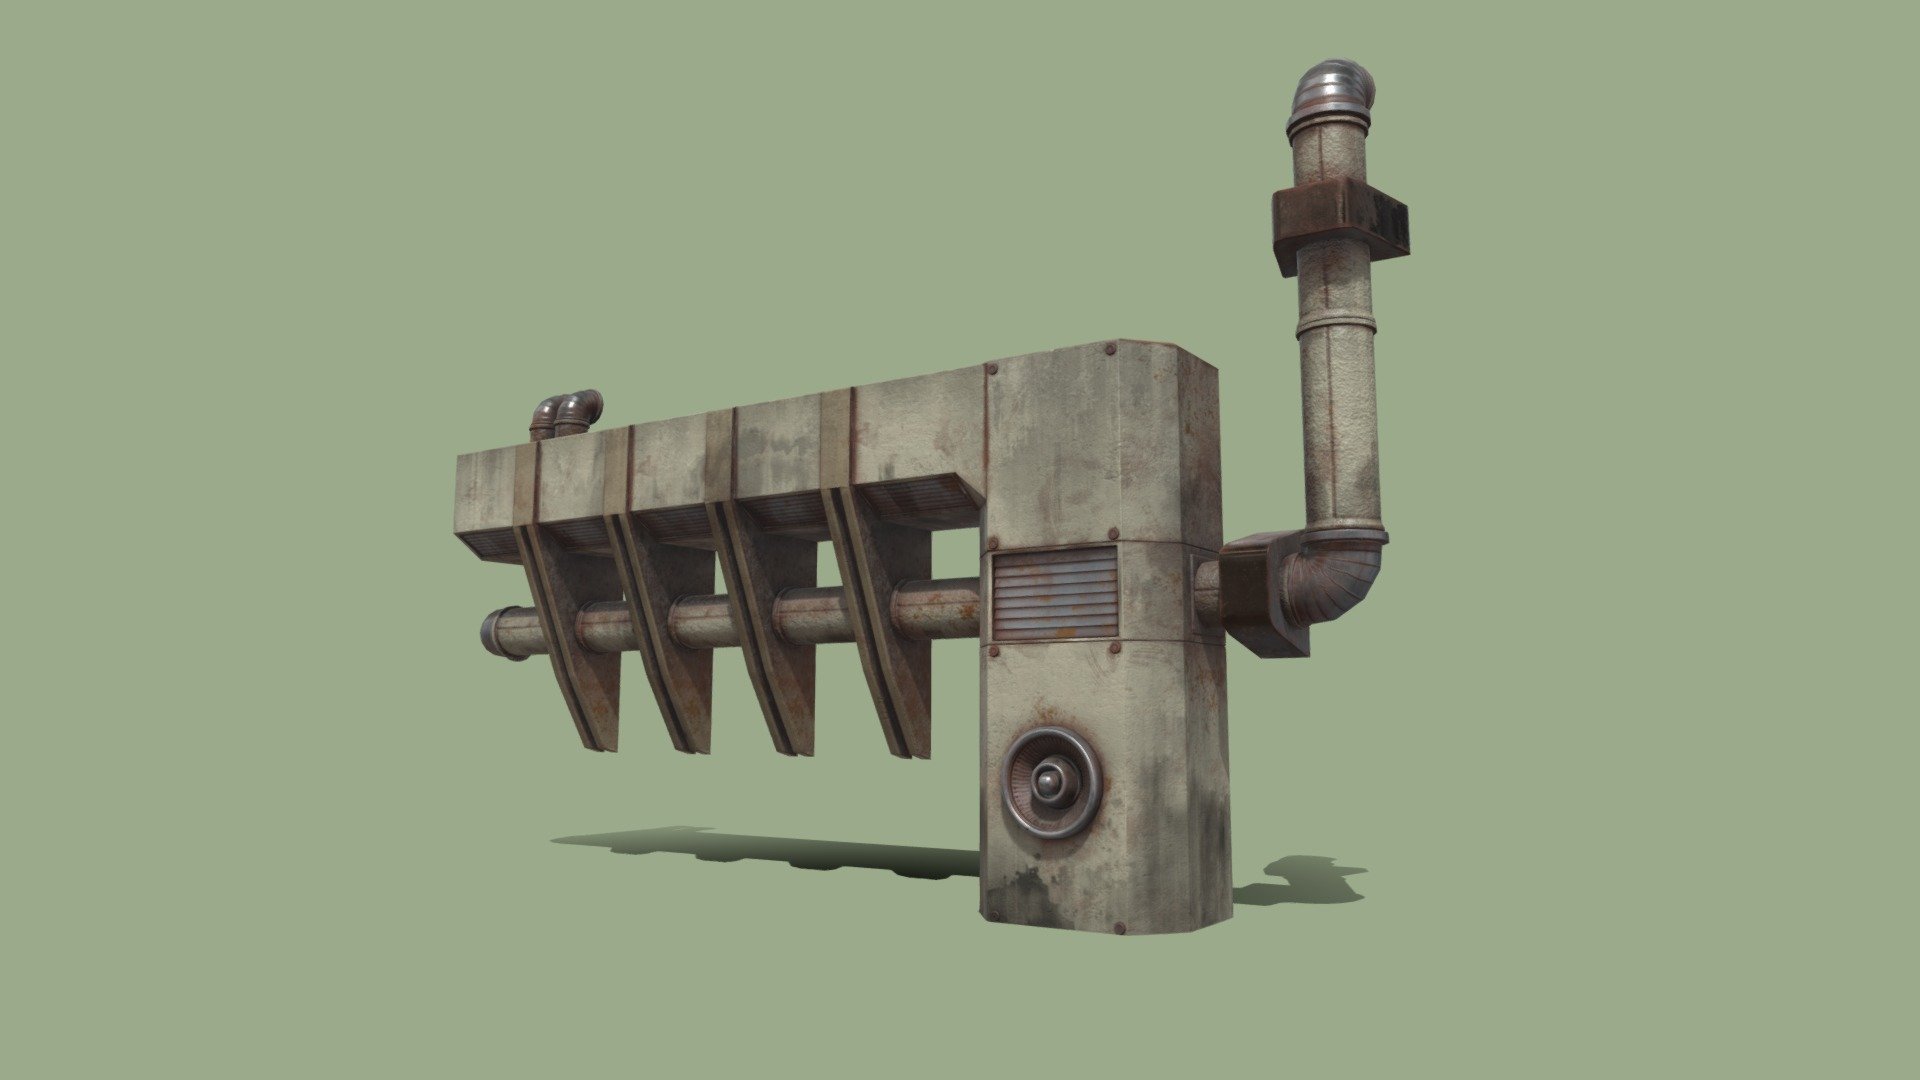 This is an MMLX environment asset designed to work within the dungeon ruins of the Mega Man Legends universe. As seen in the concept art, this is a wall unit that has details to suggest it is some kind ventilation and filtration support system.

The asset provided here is the high res game asset. That includes the textures. Feel free to download and use for your projects. Please credit PSYCHOPOMP and/or JJ Chalupnik for the modeling/texturing if you decide to use it.

Learn more about the fan project here: https://psychopomp-studios.com/mmlx/ - Wall Vents A - Download Free 3D model by TUGBOAT GAMES (@TugboatGames) 3d model